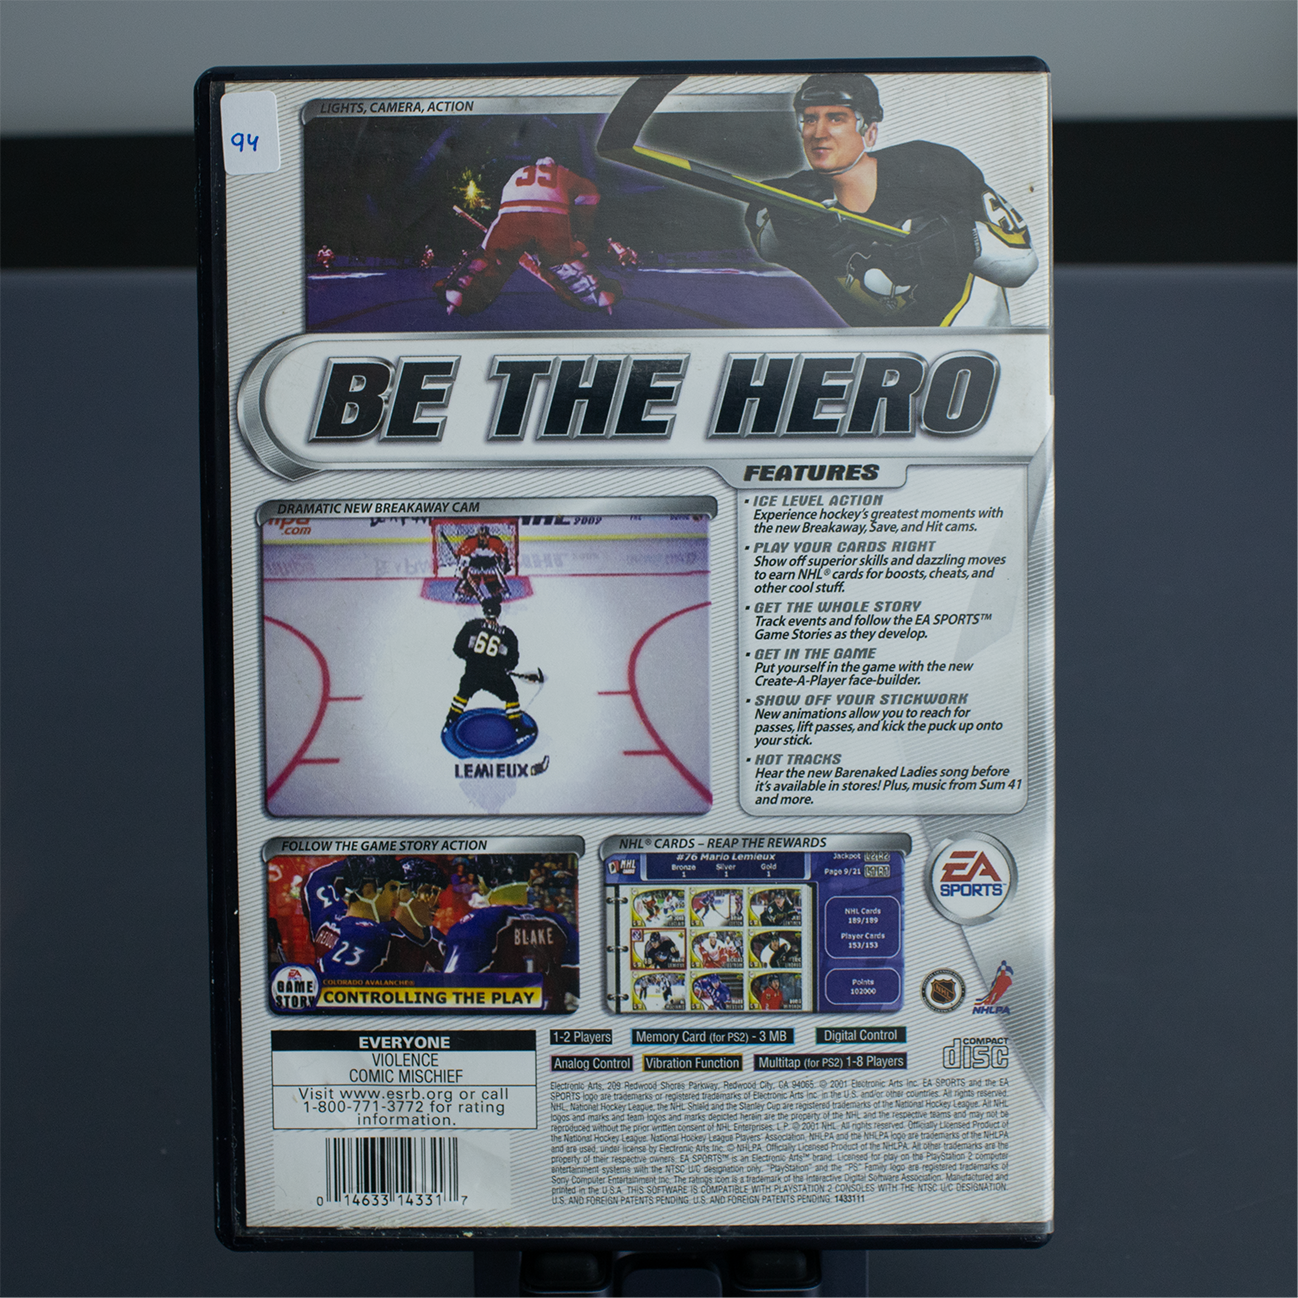 NHL2002 - PS2 Game